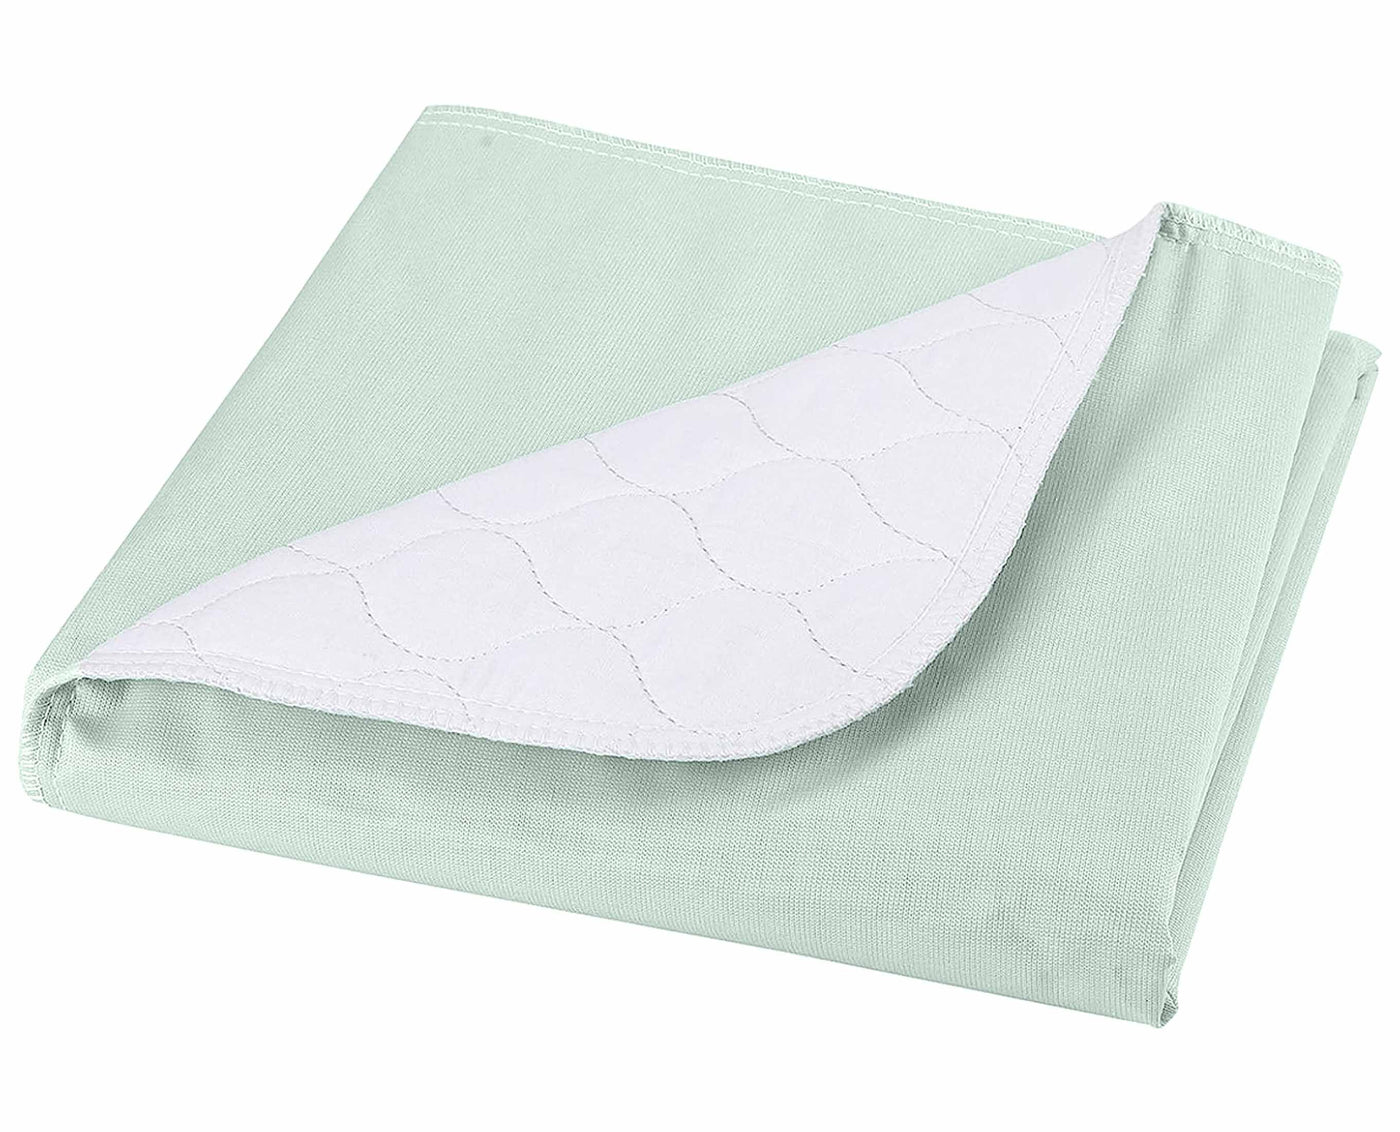 Water proof incontinence pad